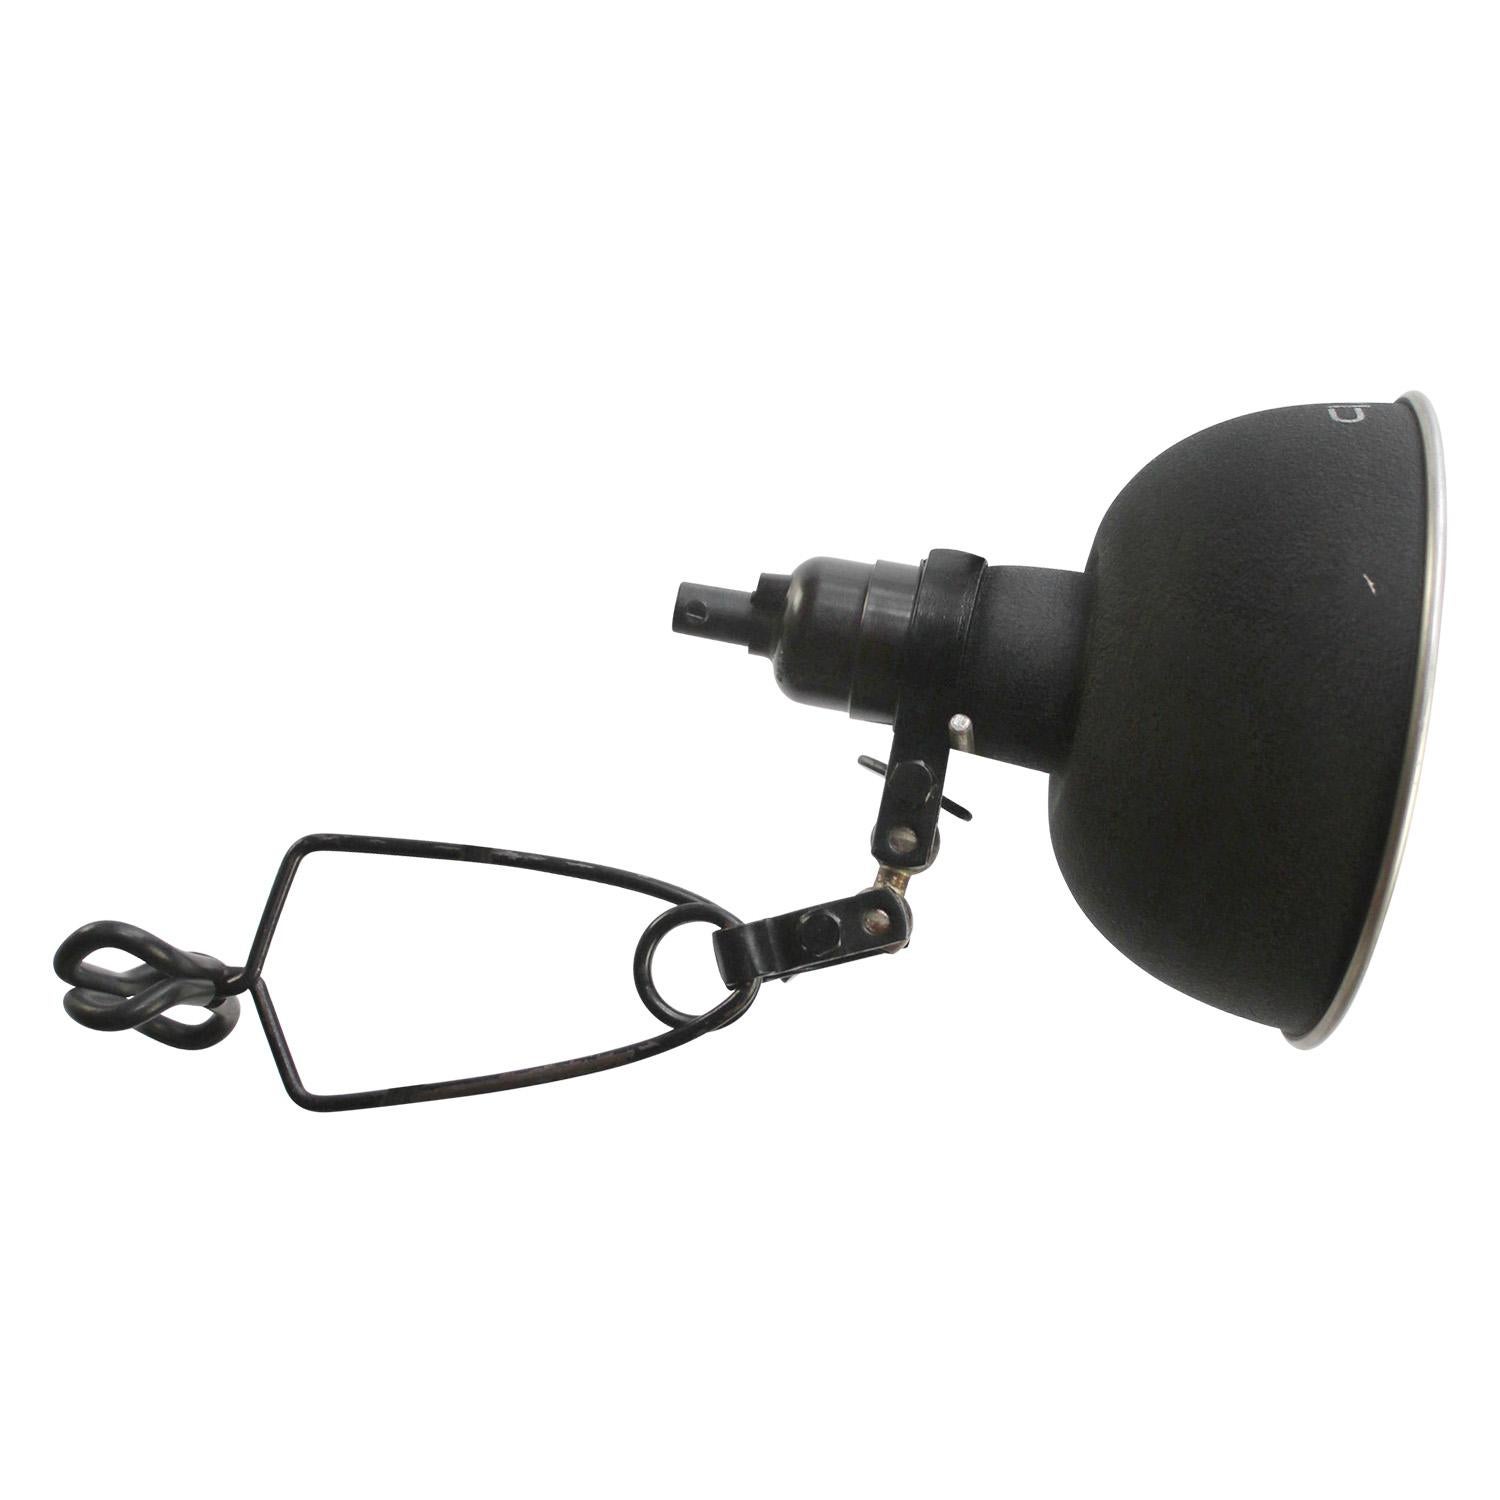 Photography, studio wall lamp by KAP
Clamp spotlight with black aluminum shade
Adjustable arm.

Available with UK / US plug

Weight: 0.70 kg / 1.5 lb

Priced per individual item. All lamps have been made suitable by international standards for